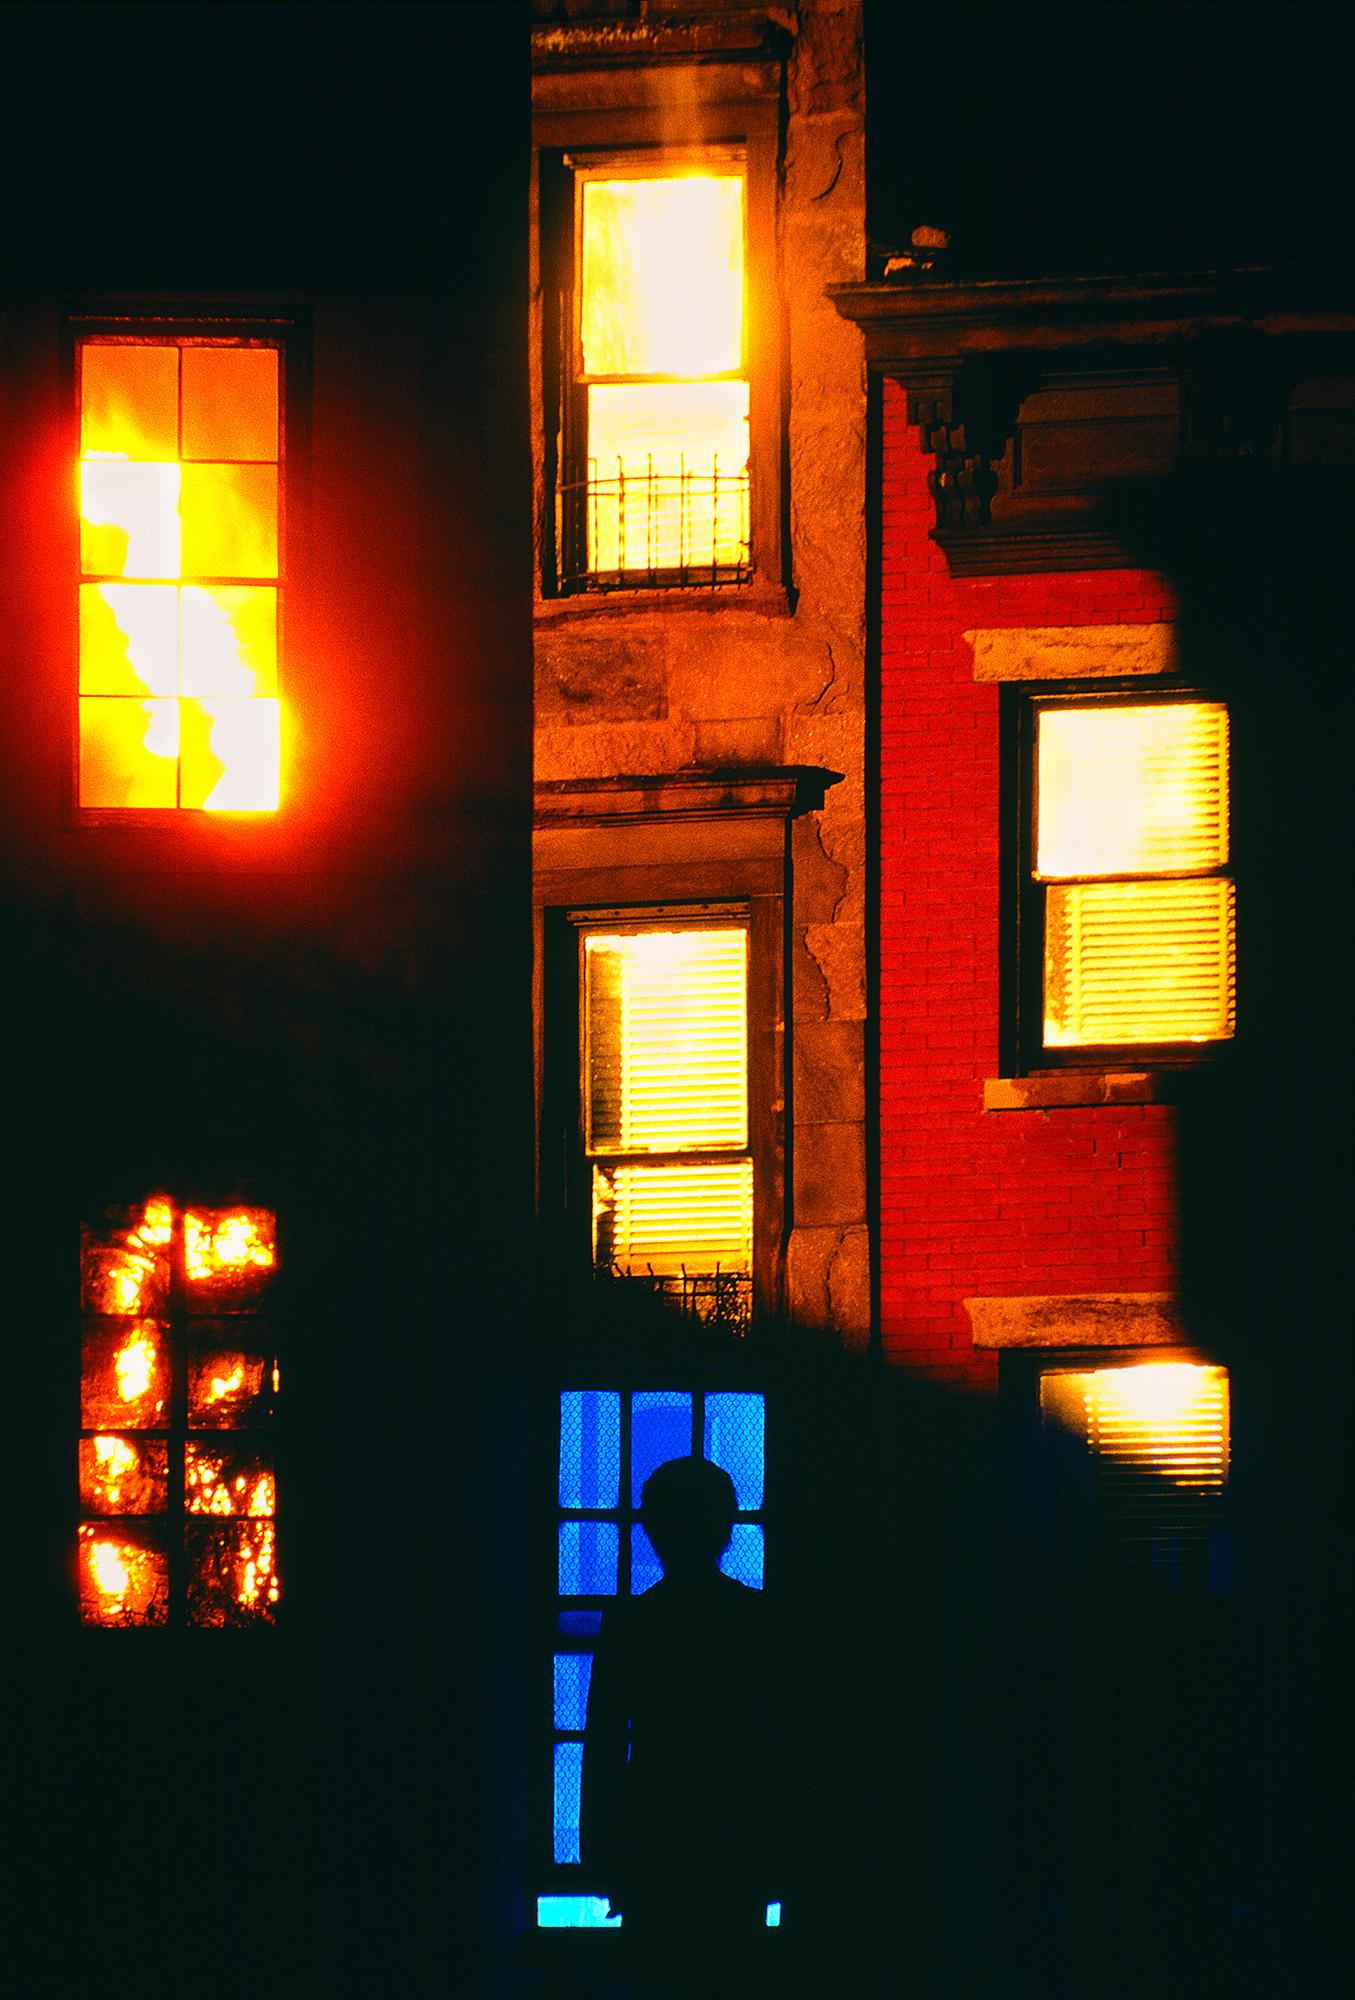 Mitchell Funk Color Photograph - Golden Light In Windows On Old Brooklyn Building. New York City